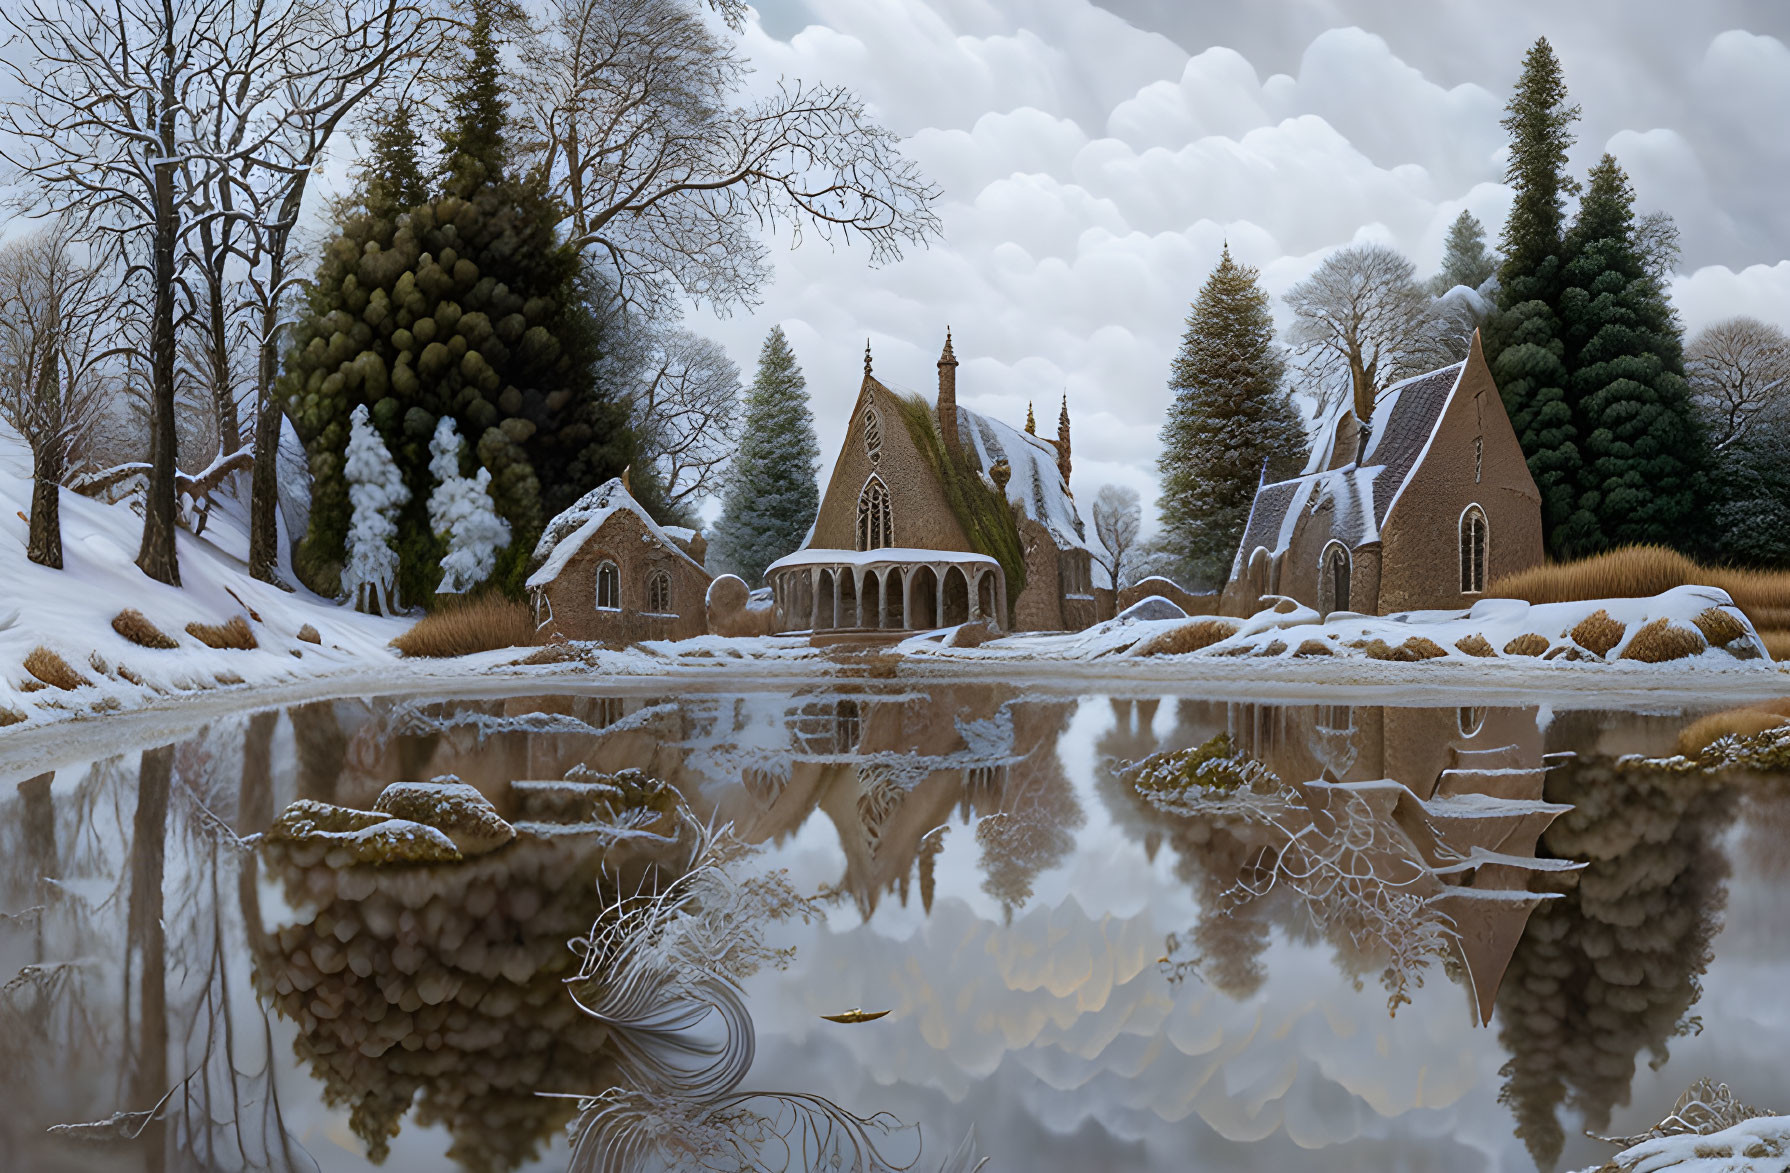 Snow-covered buildings and trees reflected in a still lake on a cloudy day